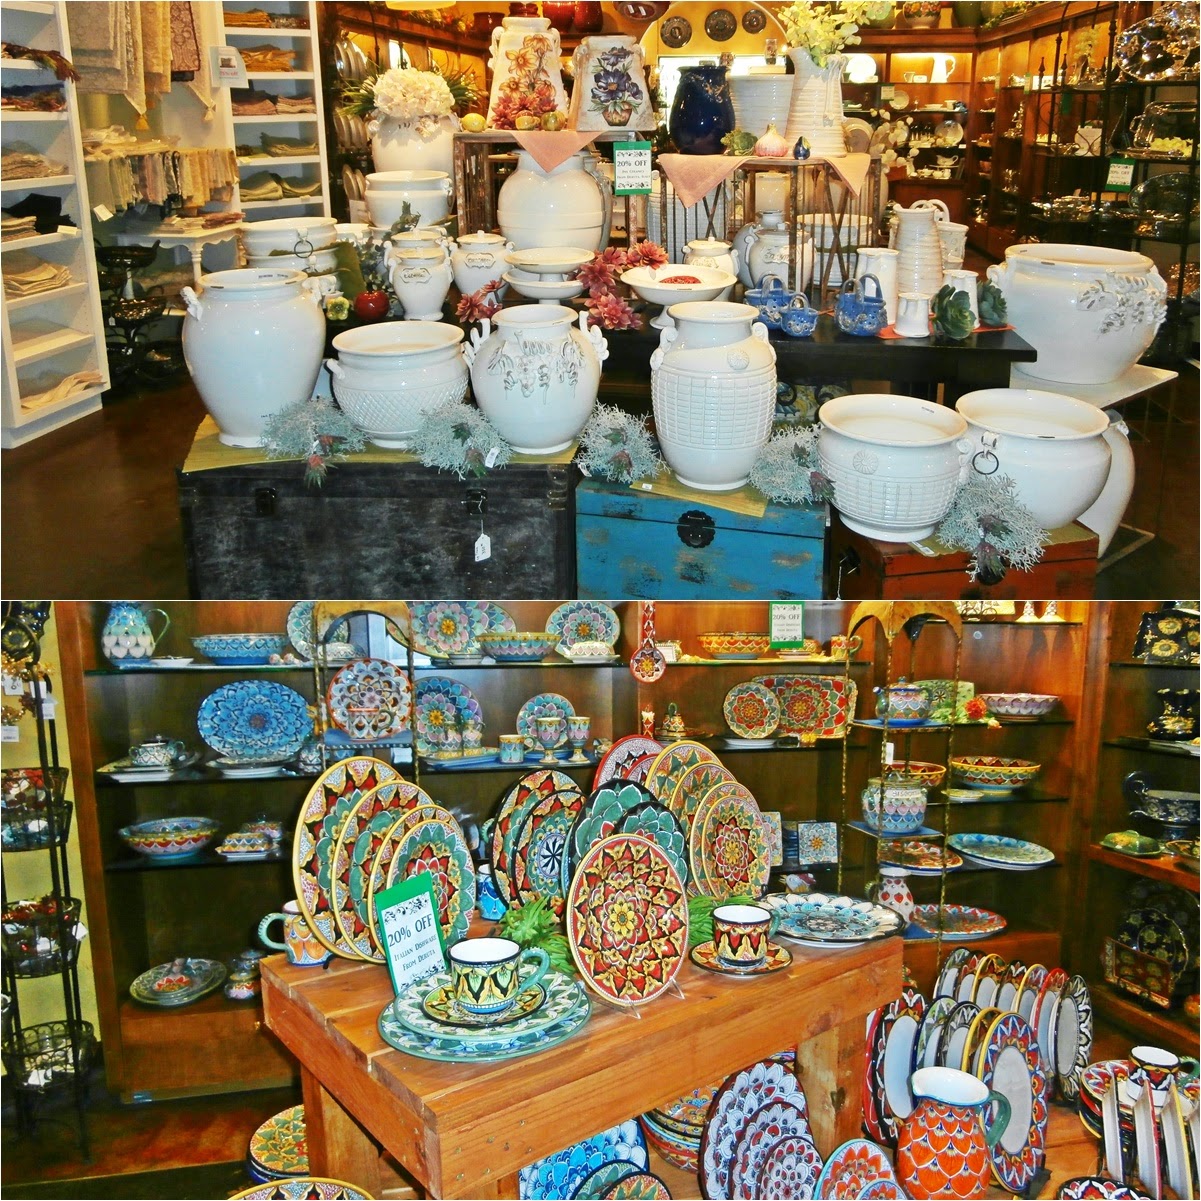 How should you price pottery?